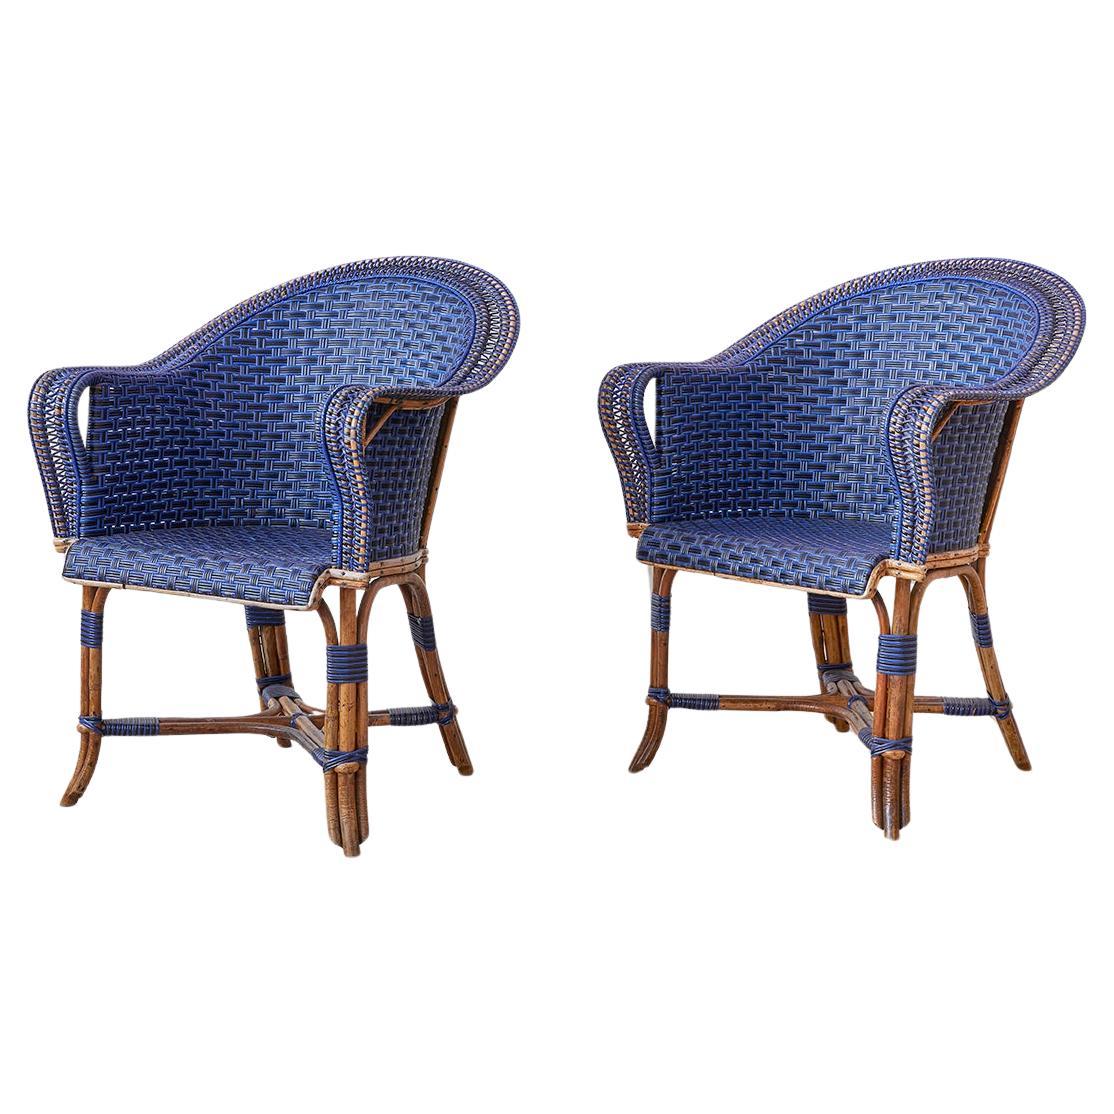 Vintage Pair of Armchairs in Blue and Black Rattan, France, Early 20th Century For Sale